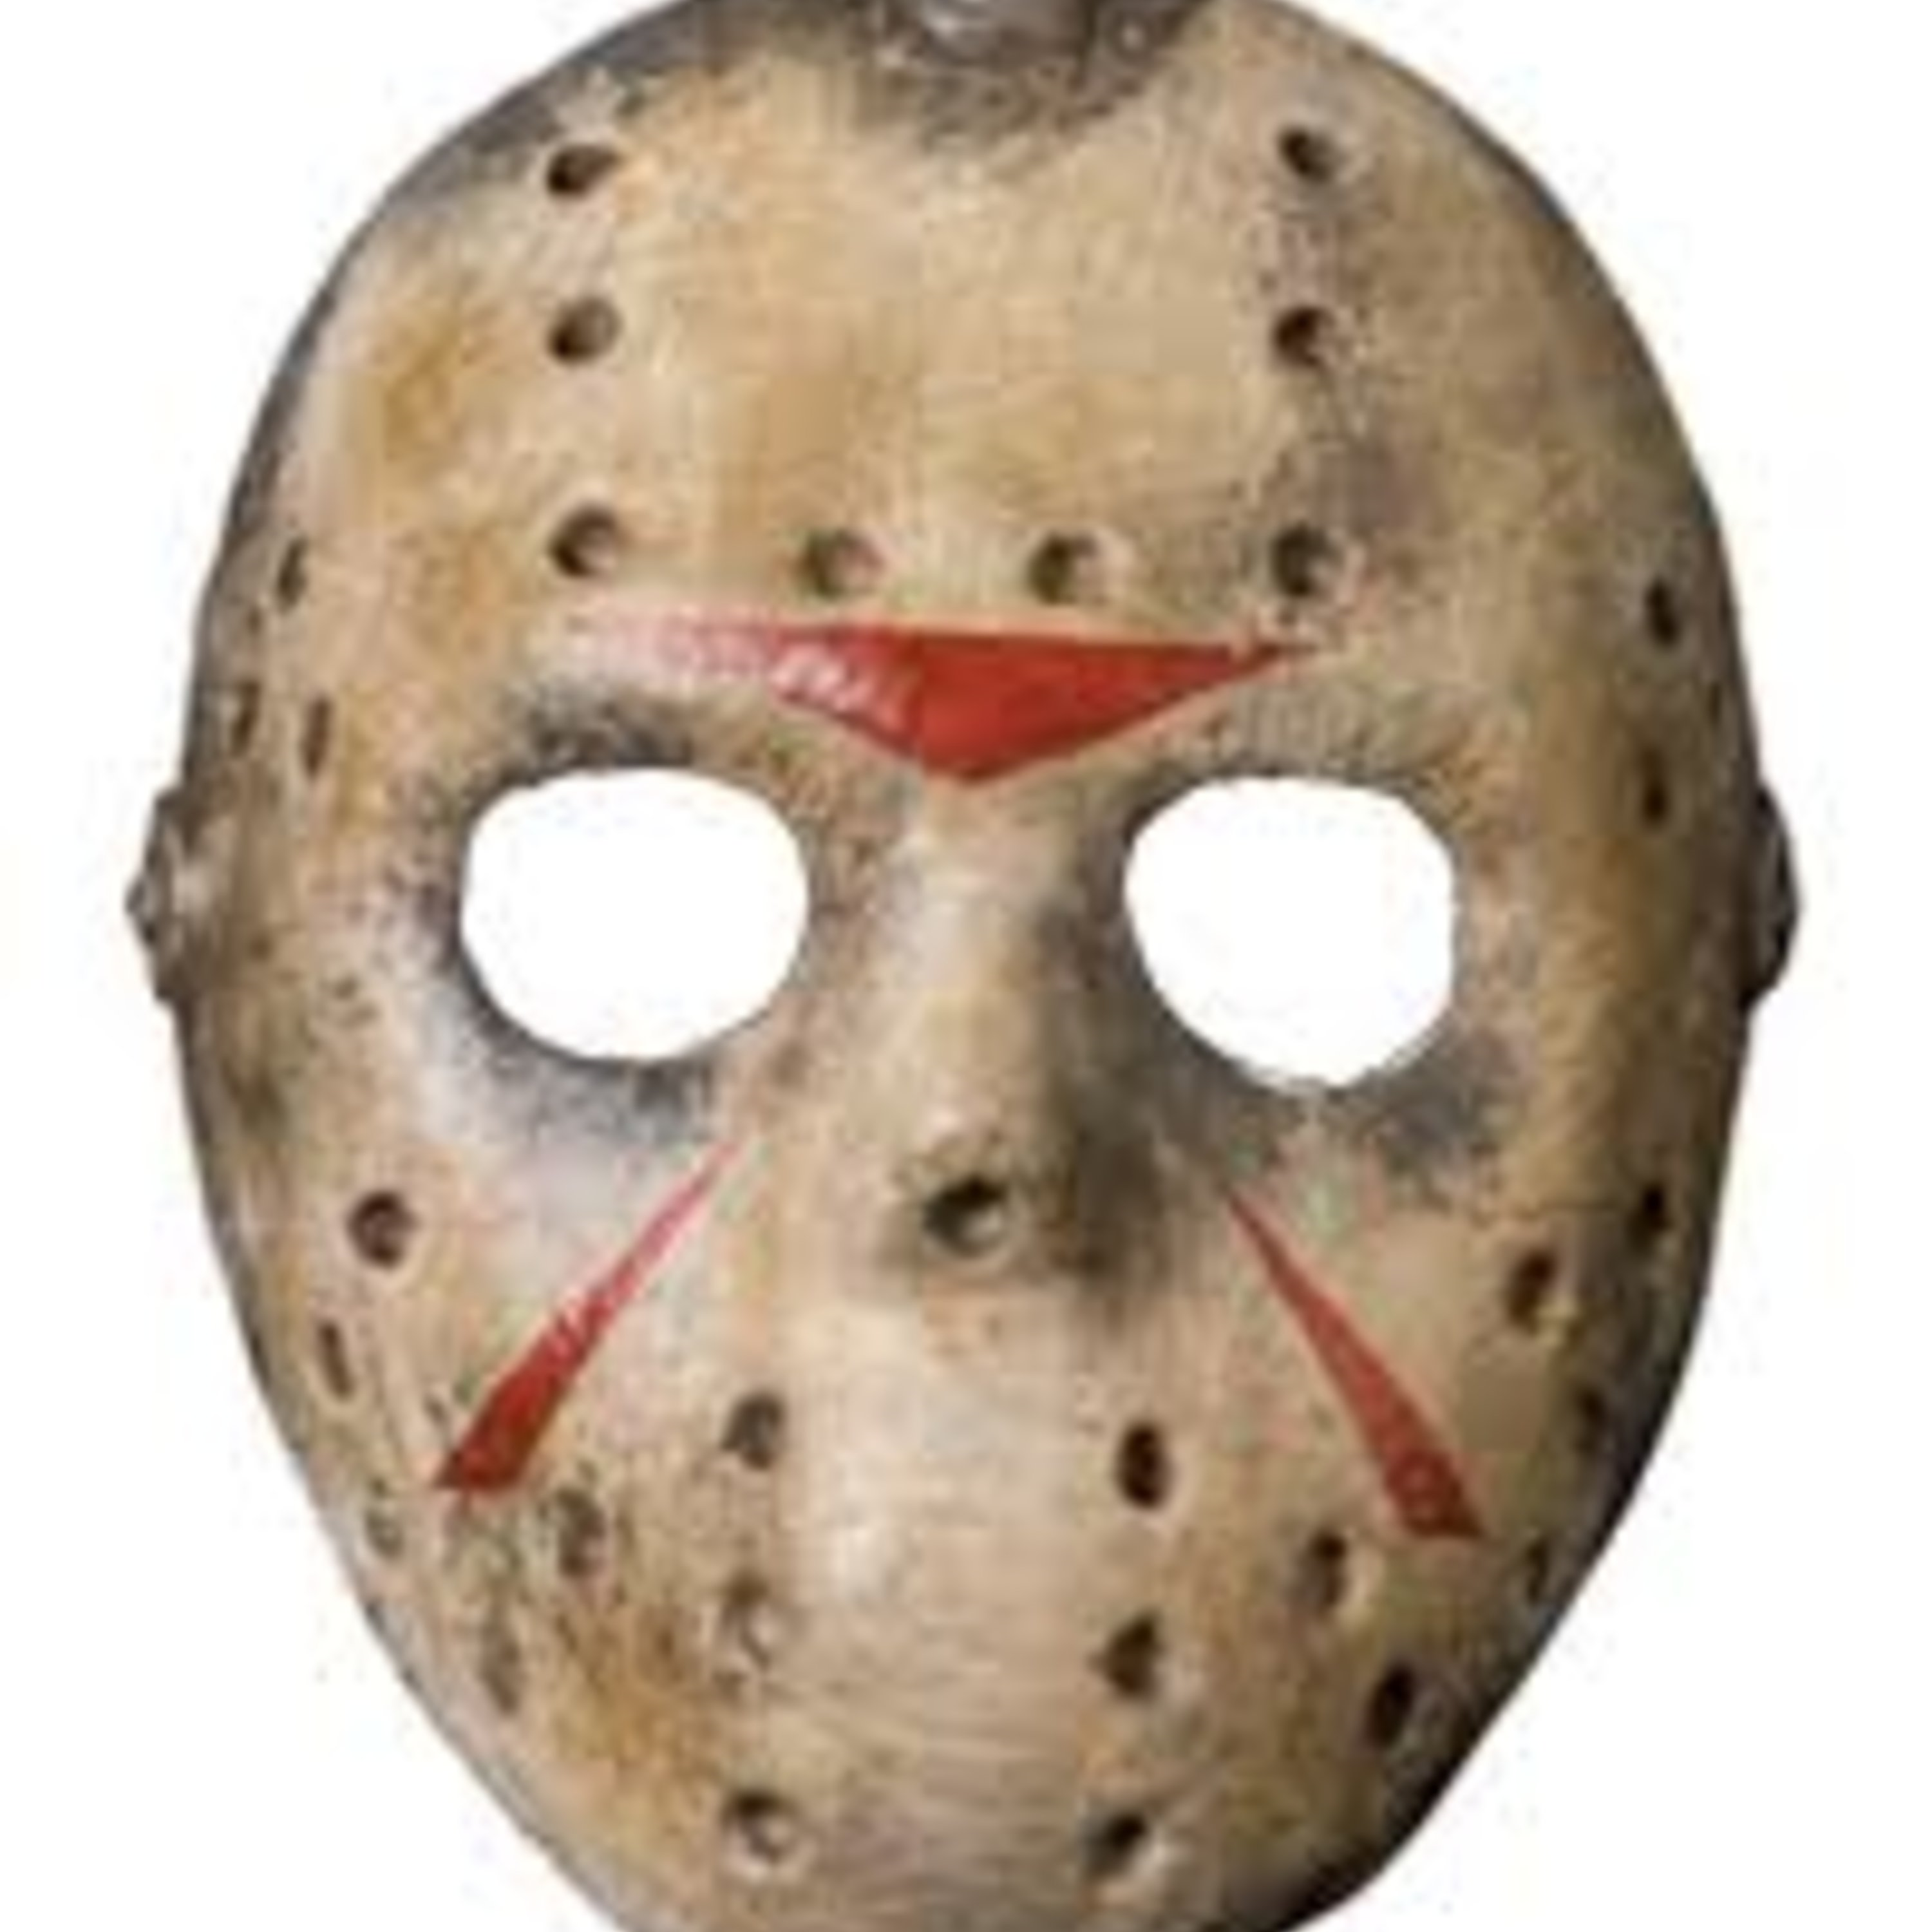 VetStory: ”Why You Will Likely Die on Friday the 13th”